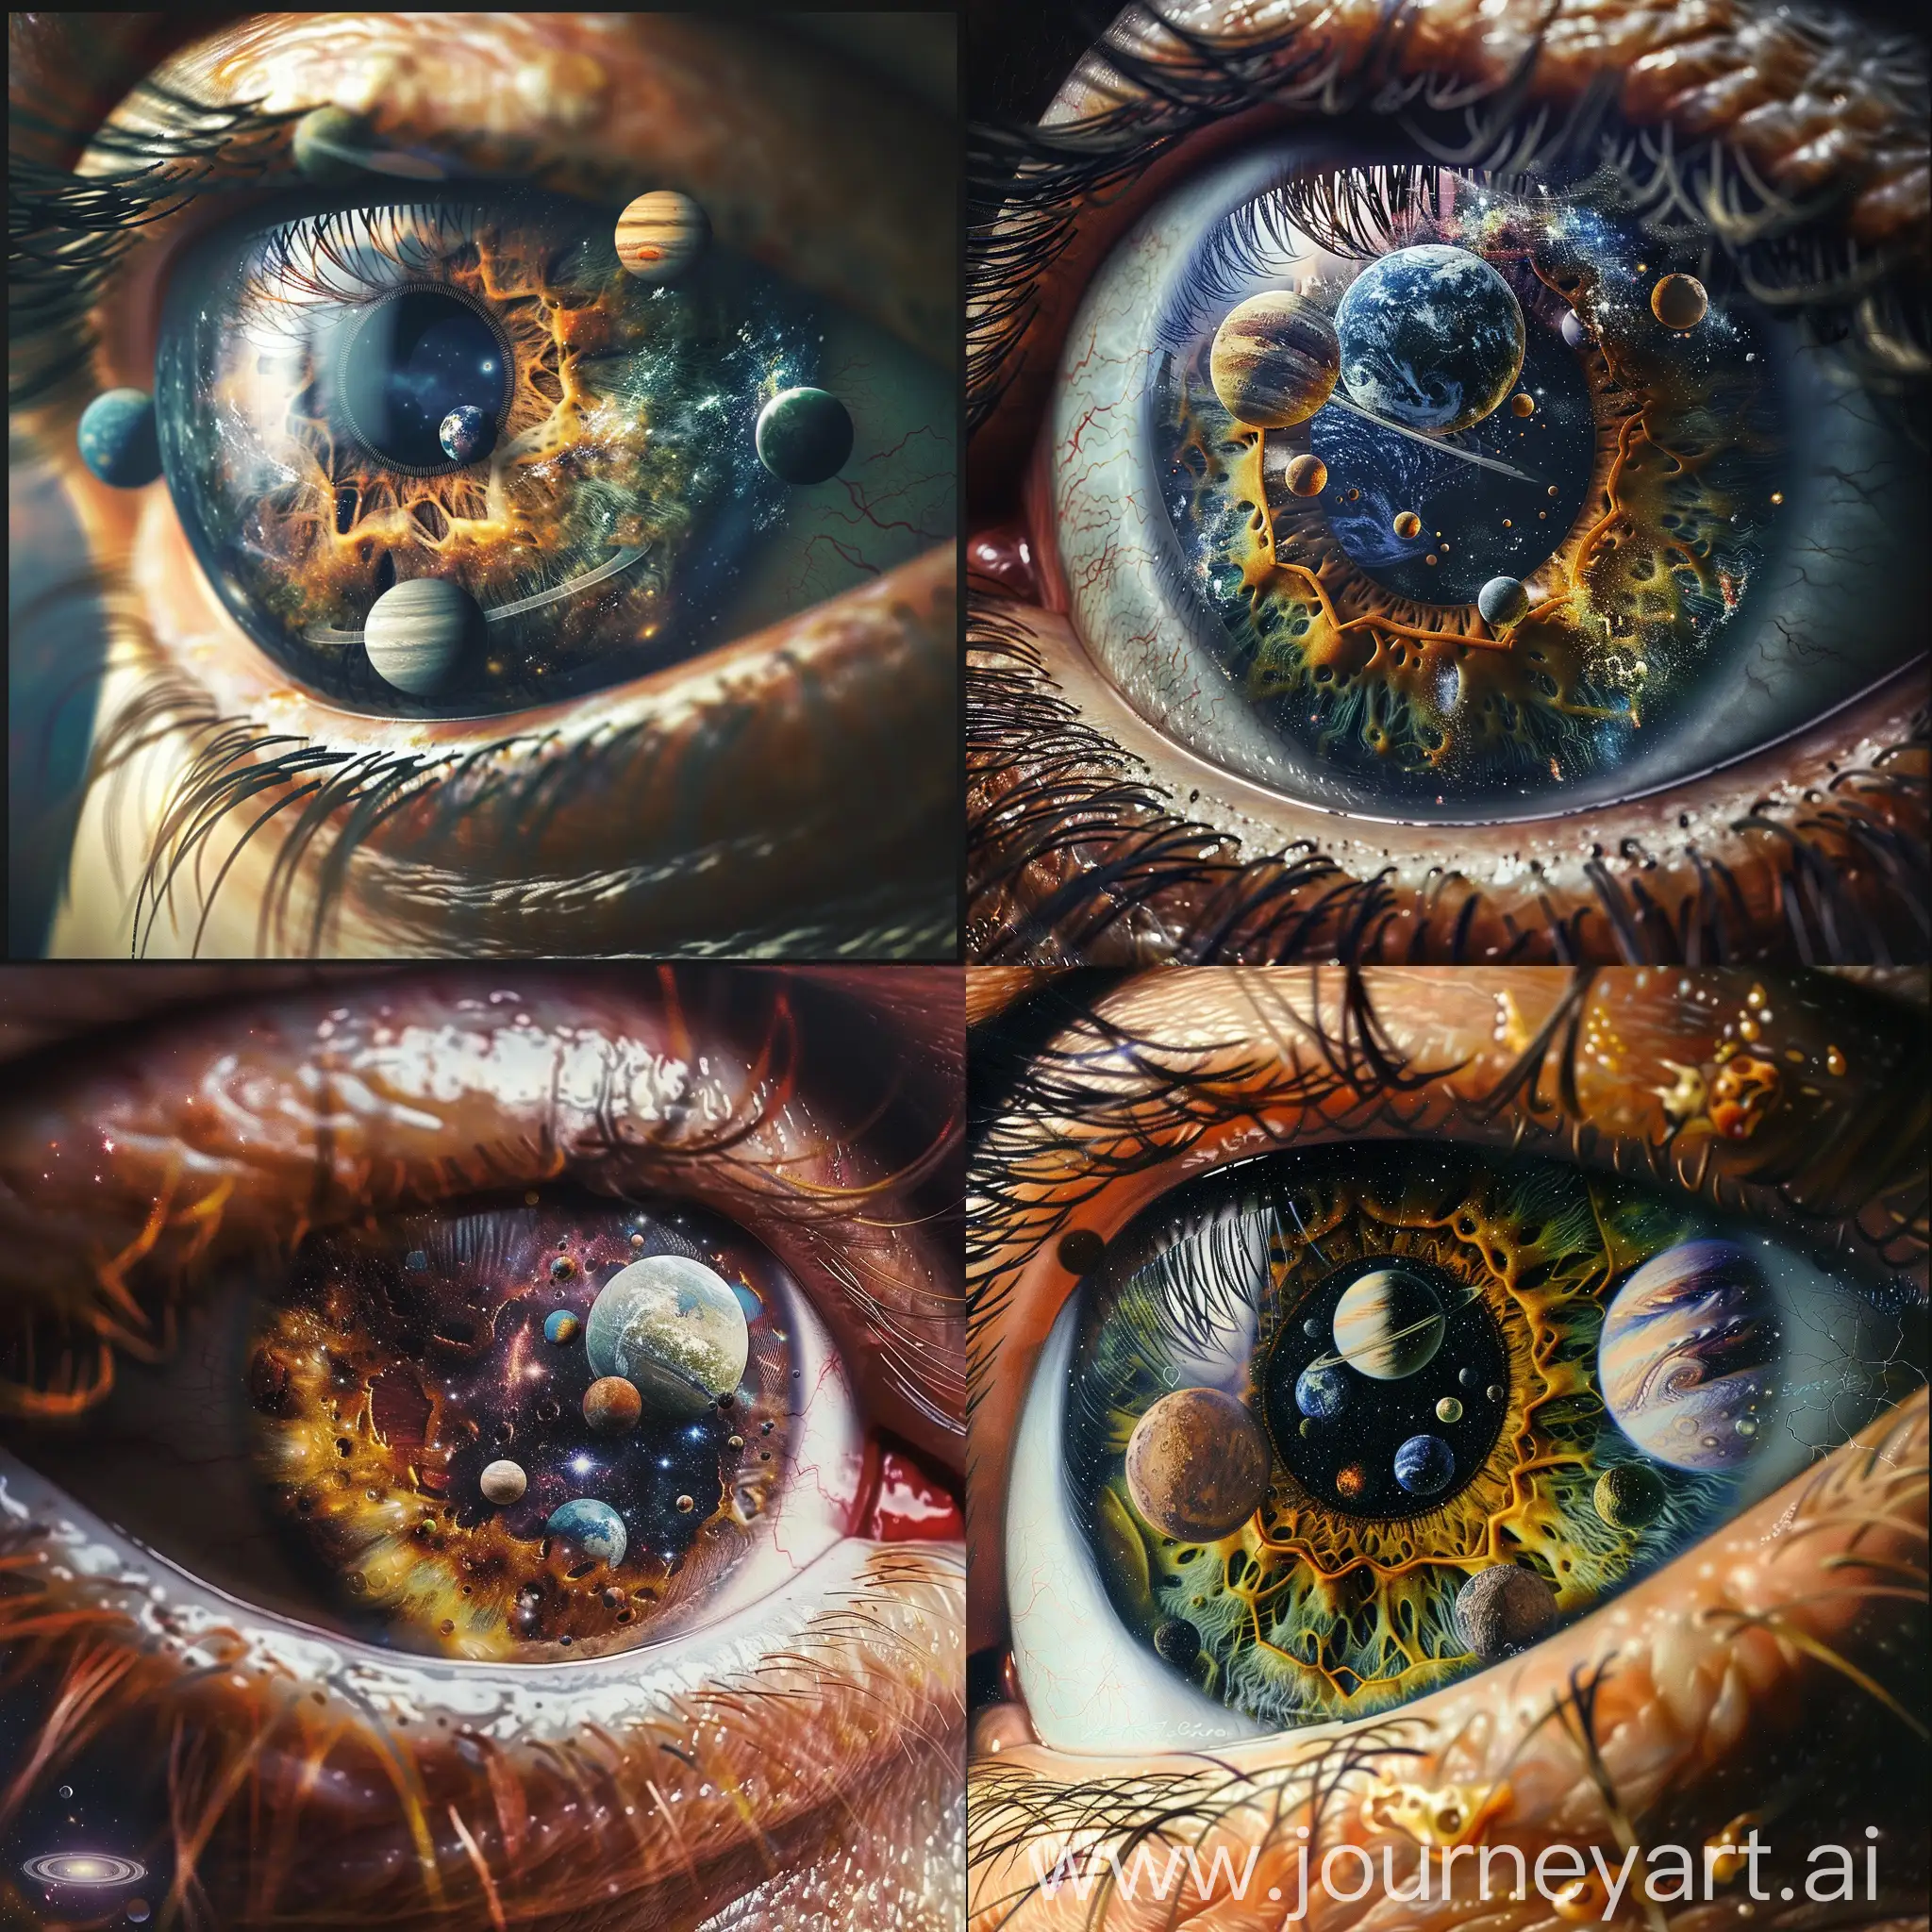 Detailed images of the eyeball, with planets superimposed instead of traditional ocular anatomy. The planets represent different emotional and psychological aspects, such as creativity, curiosity, fear, and hope. Intricate details showing the connection between ocular anatomy and space exploration, creating a visually stunning experience.